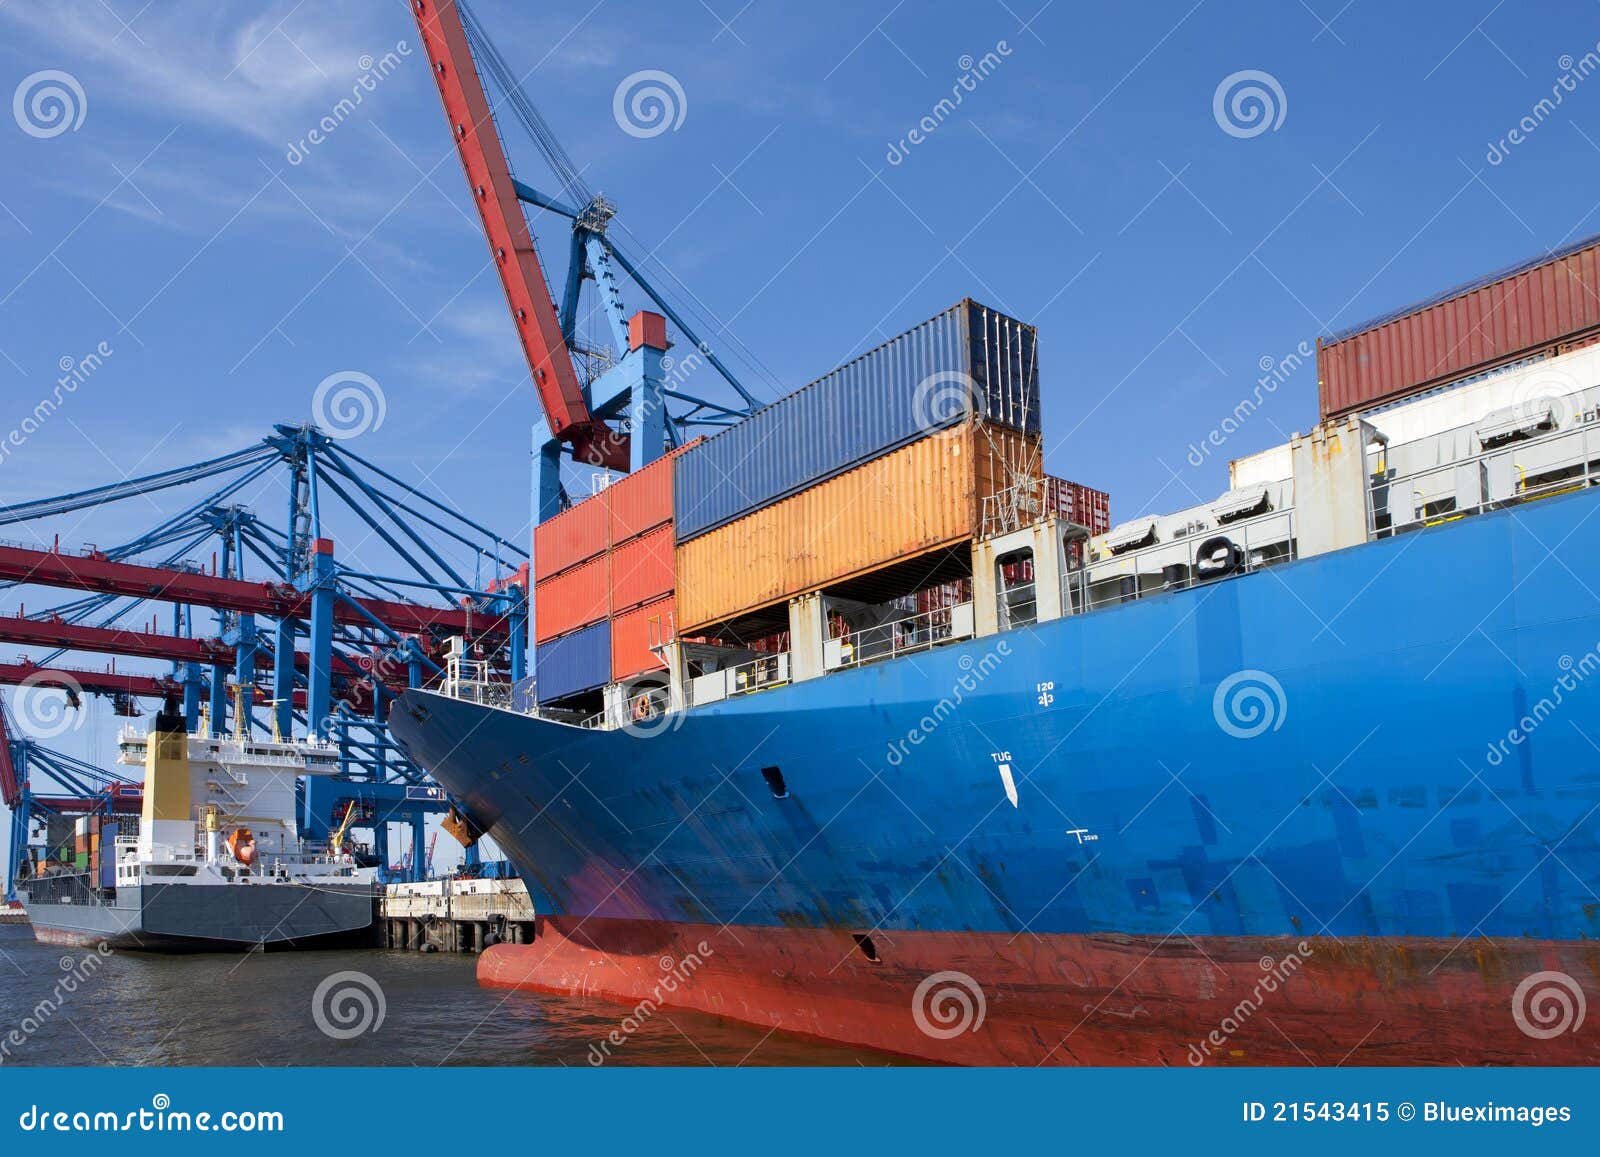 container shipment